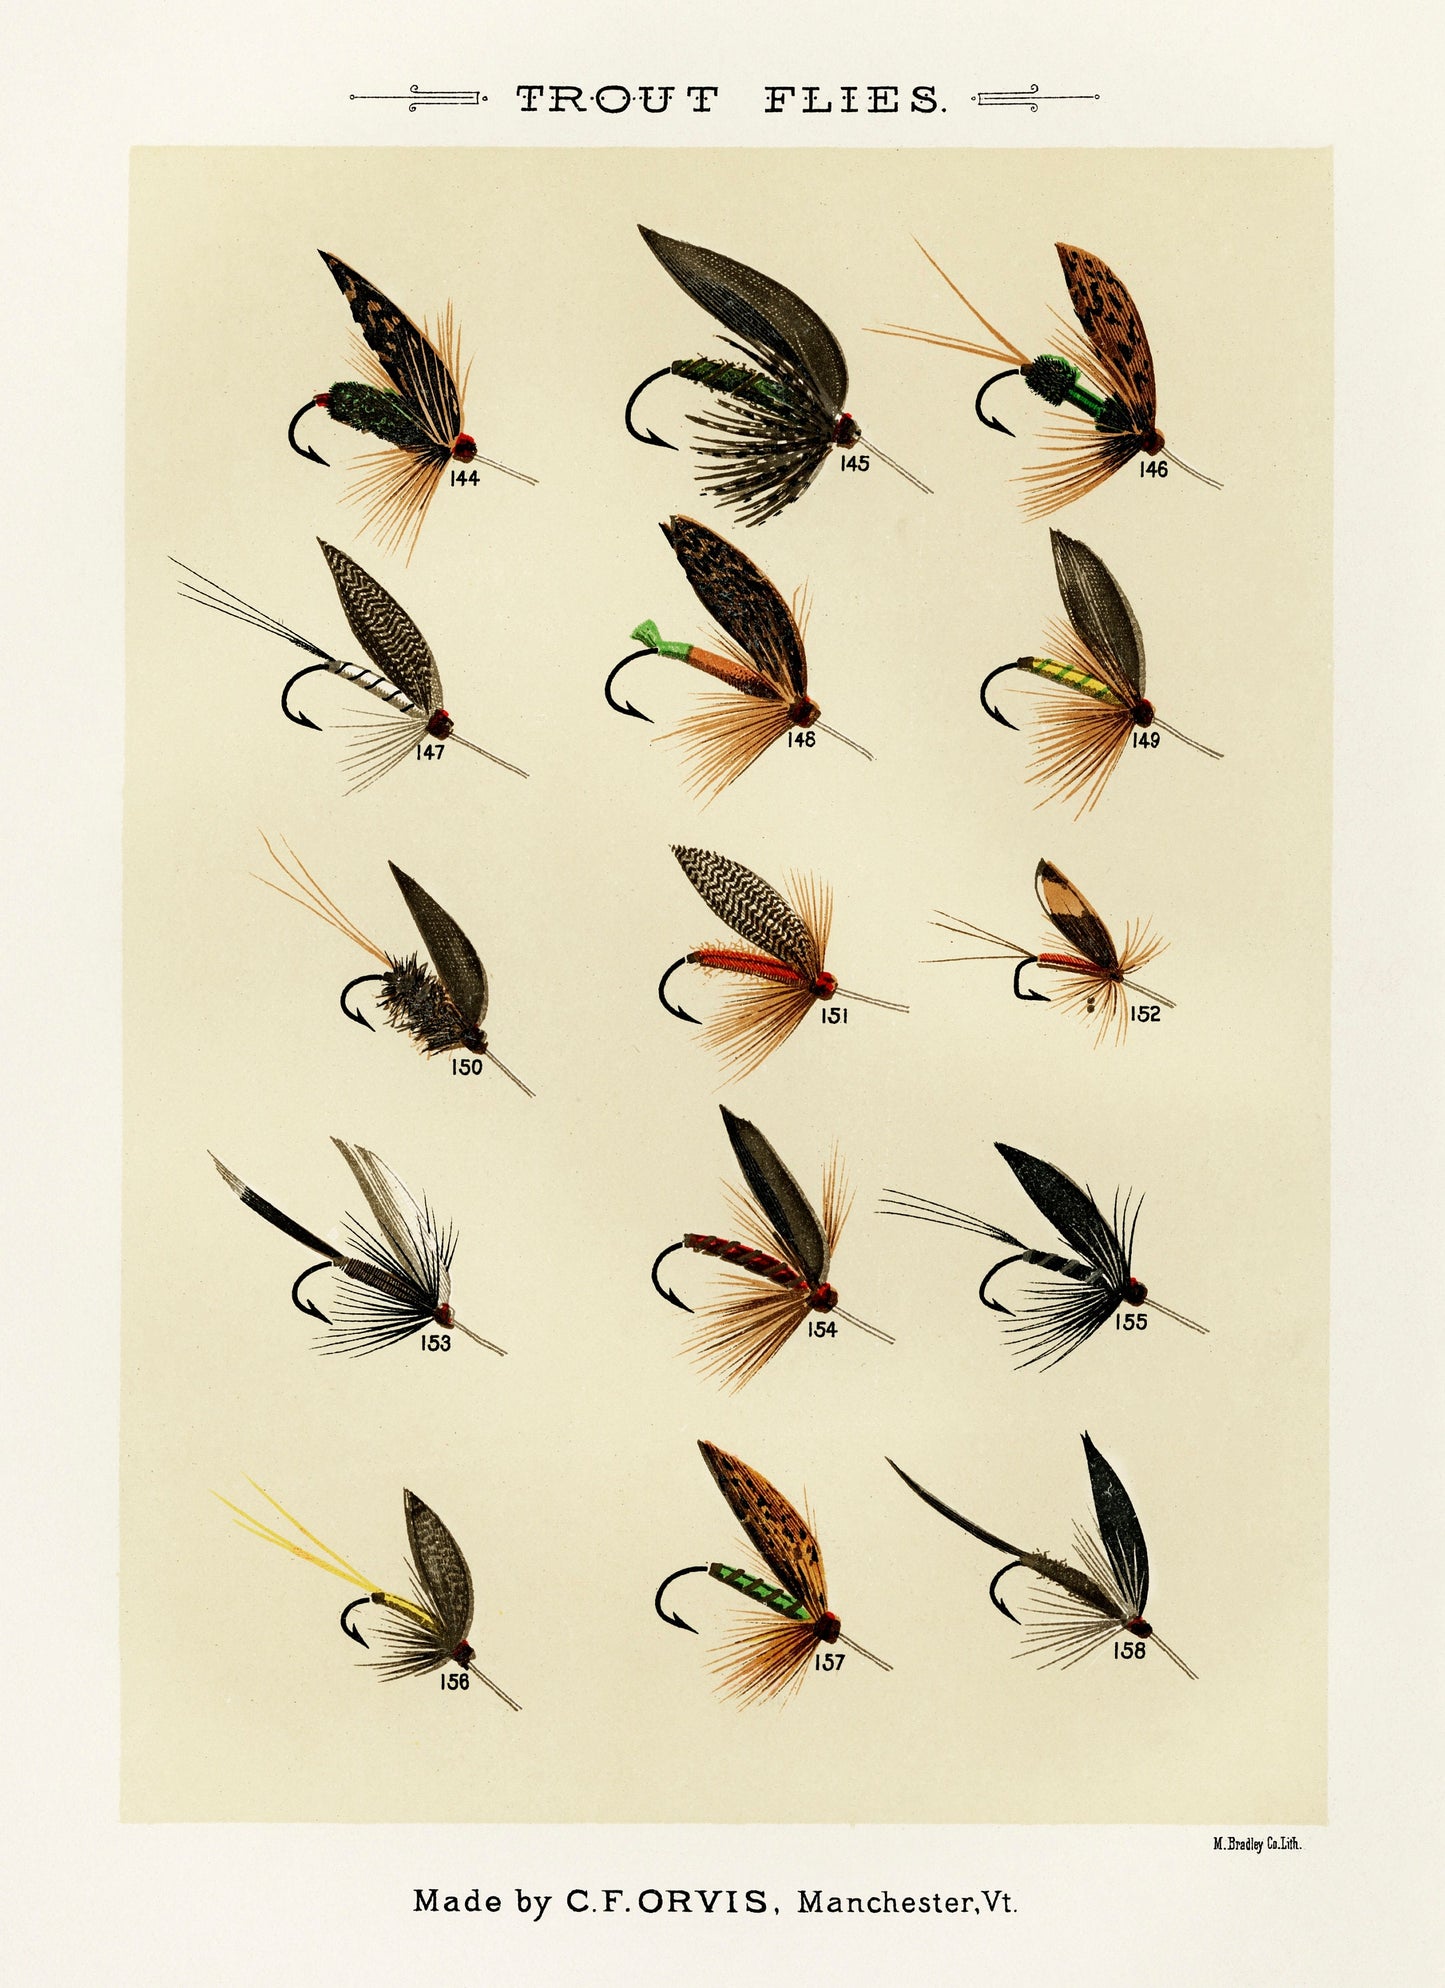 Mary Orvis Trout Flies 5 [1 Image]